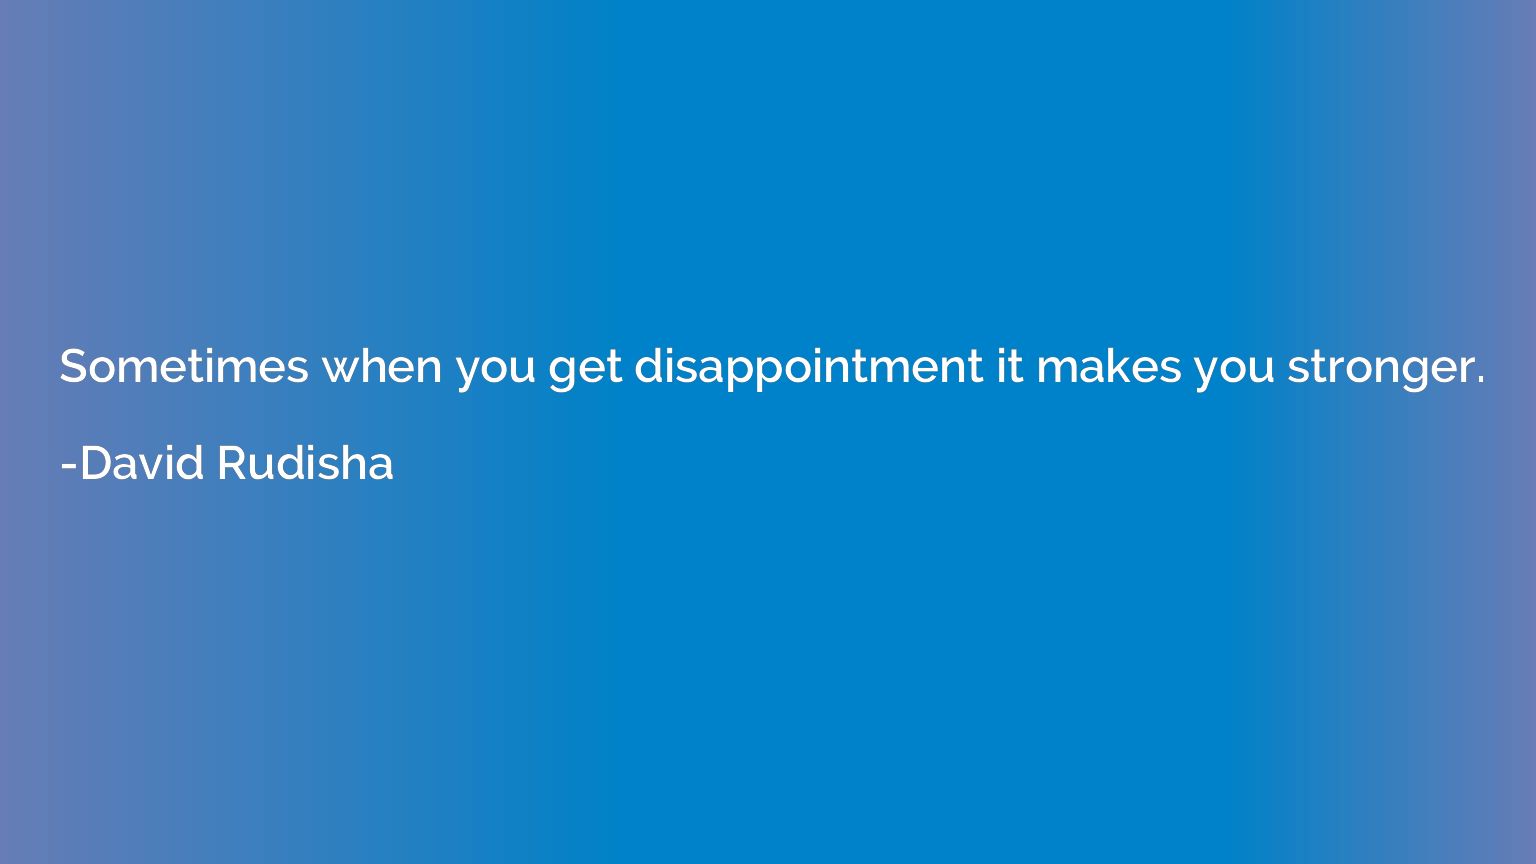 Sometimes when you get disappointment it makes you stronger.